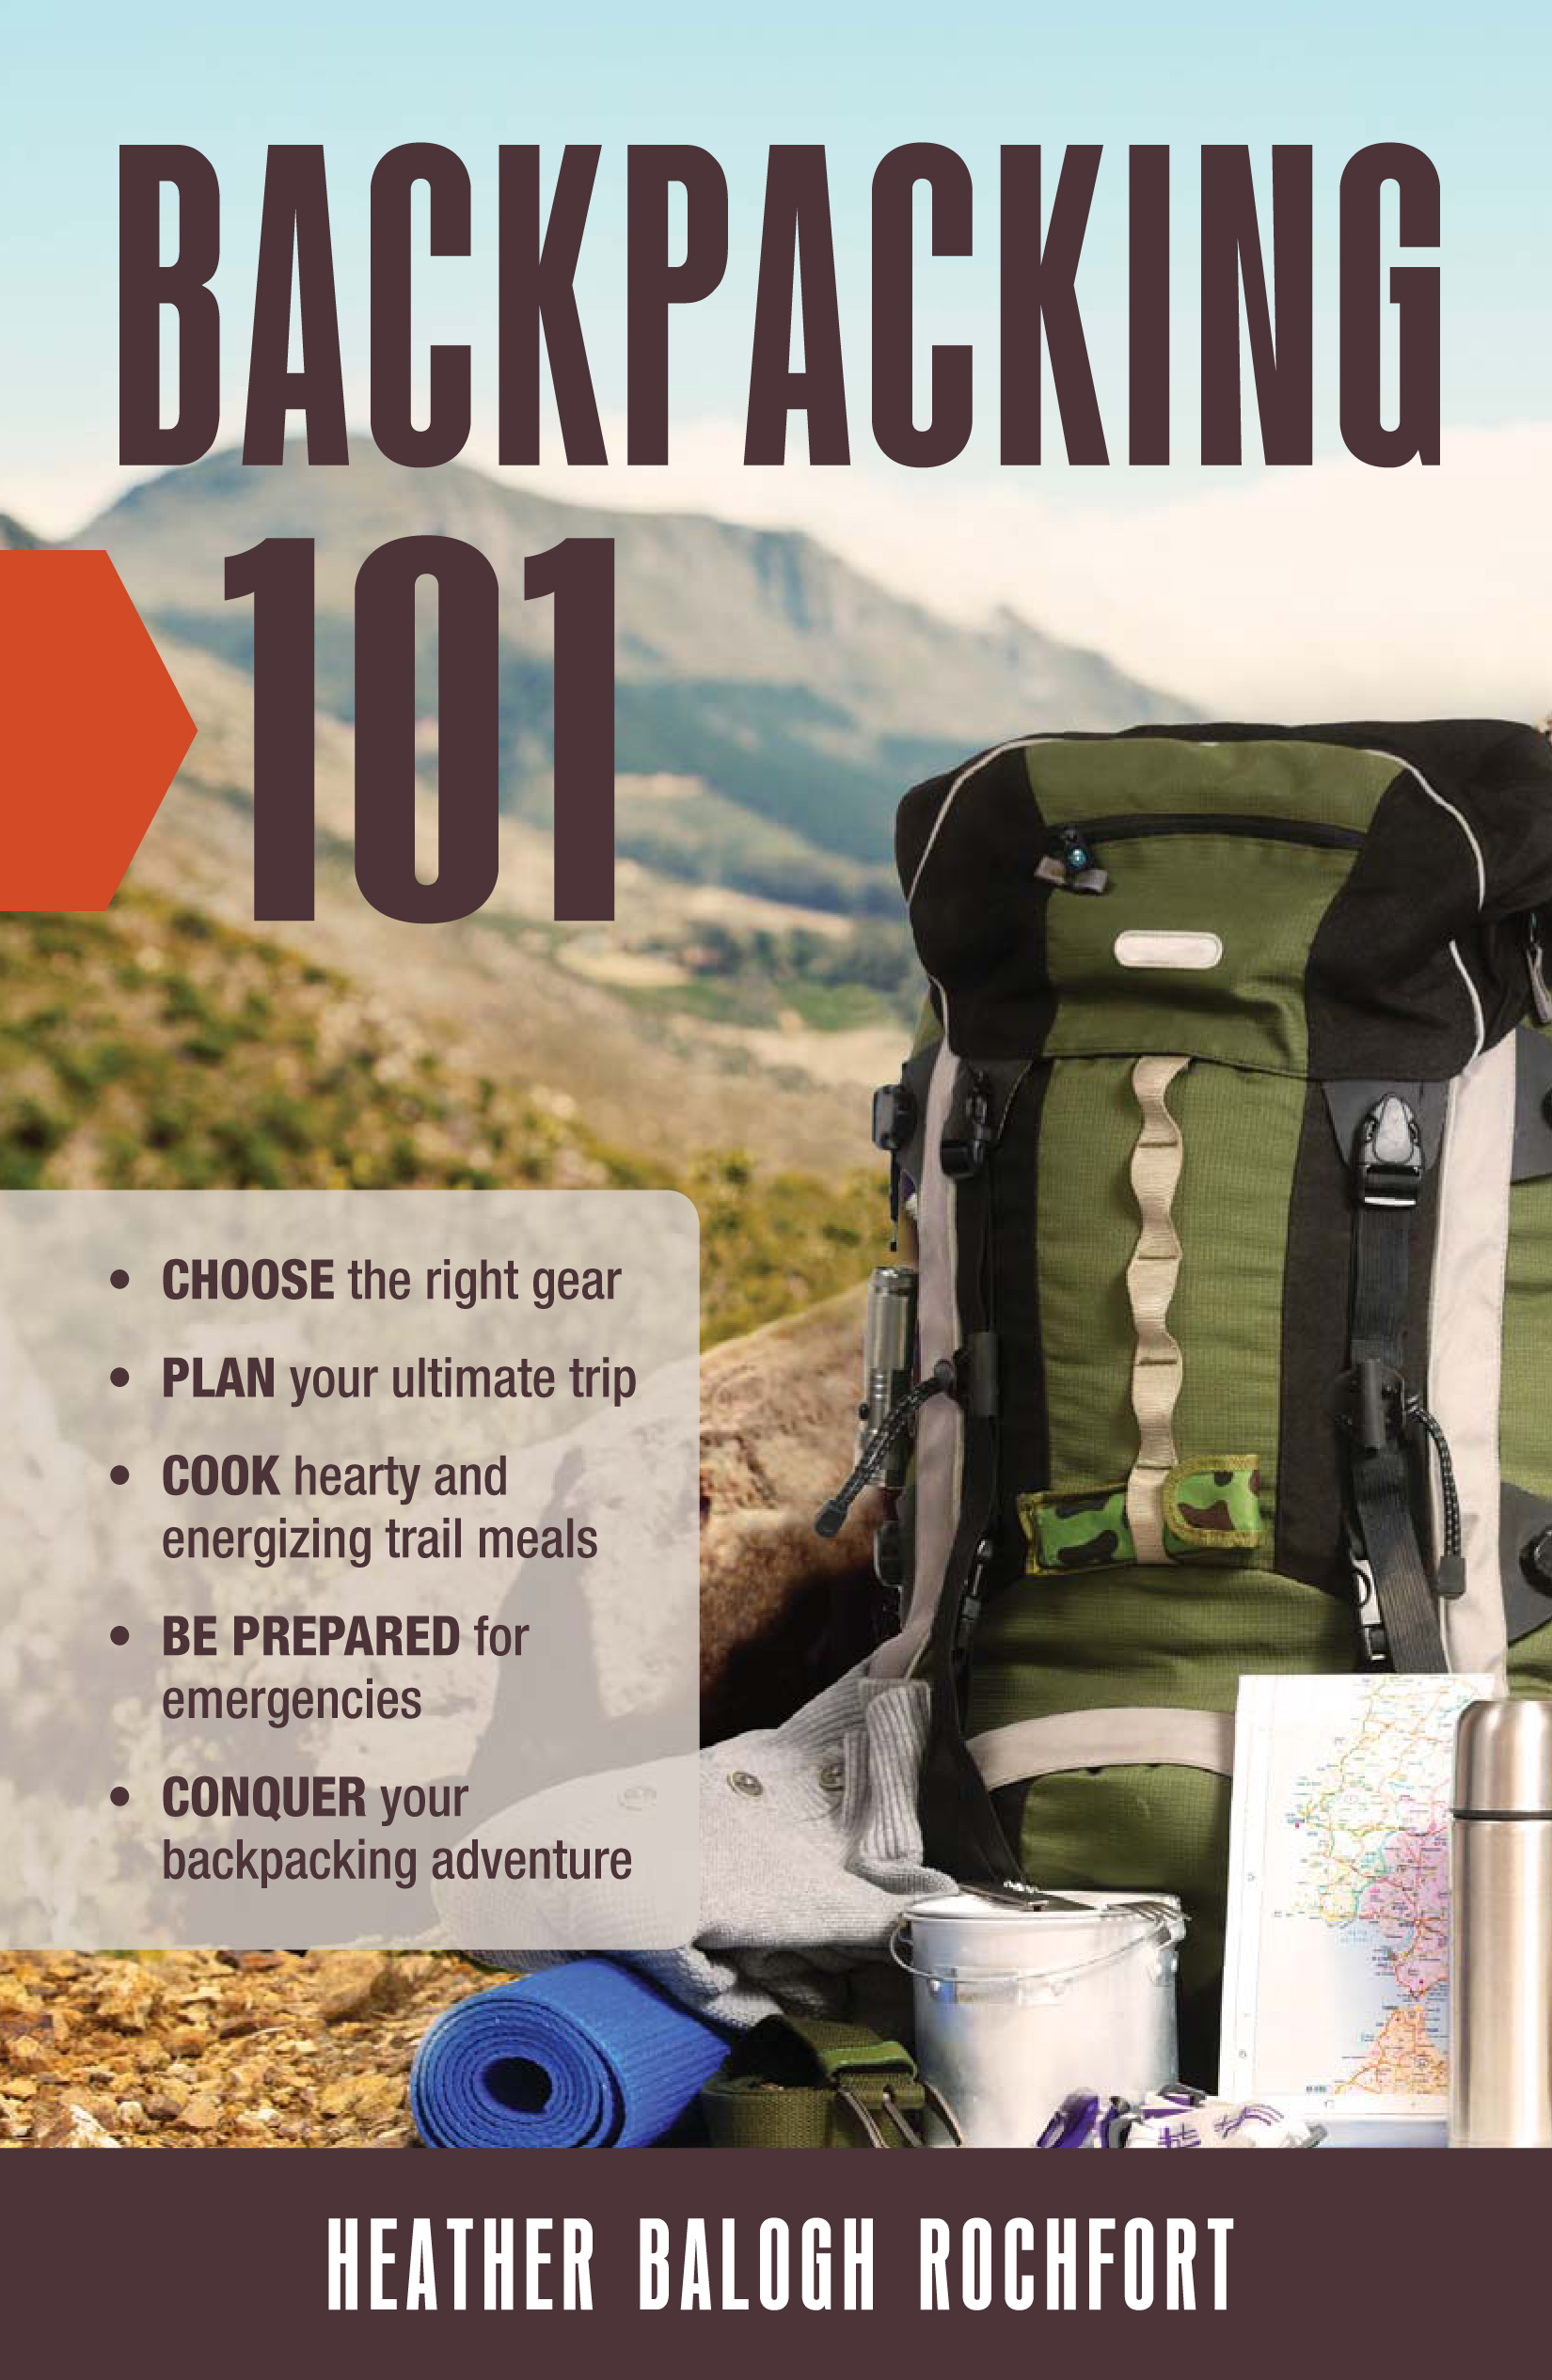 Book Review and Interview: Backpacking 101 by Heather Balogh Rochfort